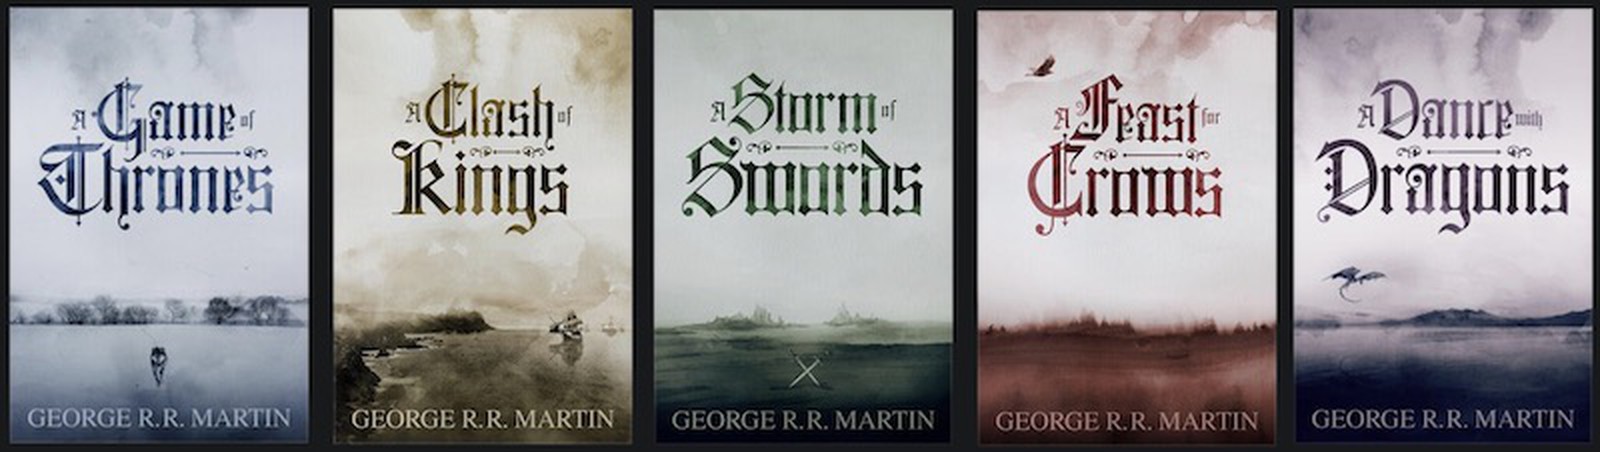 game of thrones enhanced edition ibooks download free